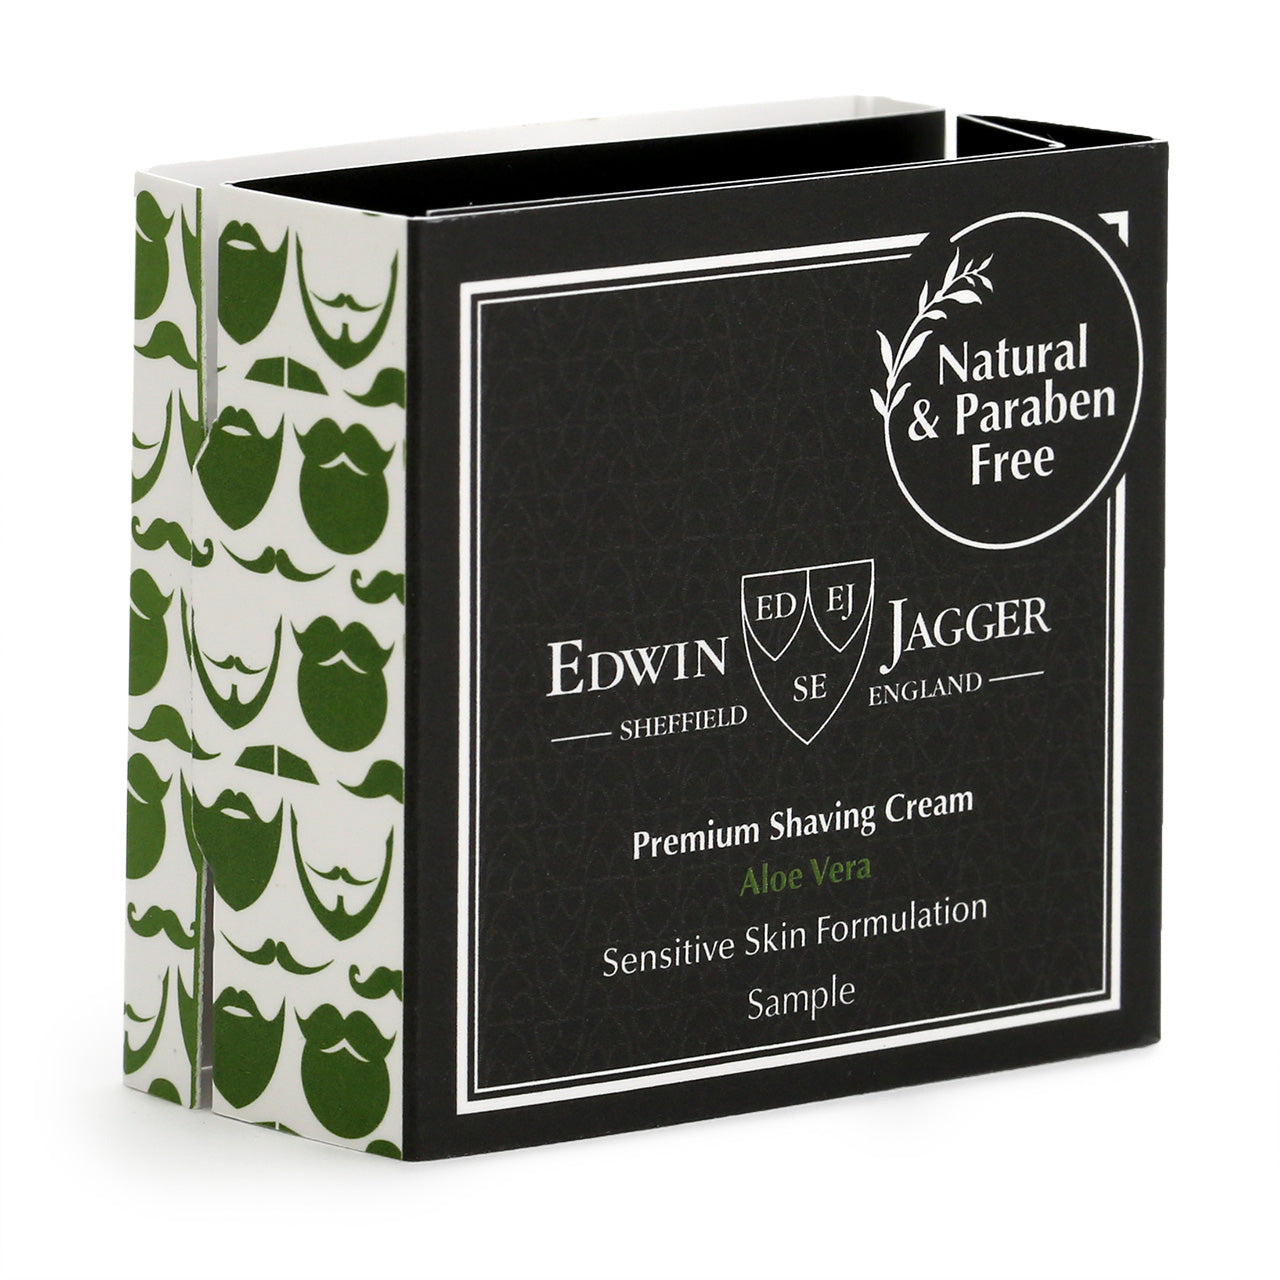 Edwin Jagger sample-sized packets of Shaving Cream and Aftershave Lotion, or Hydrating Pre Shave Lotion